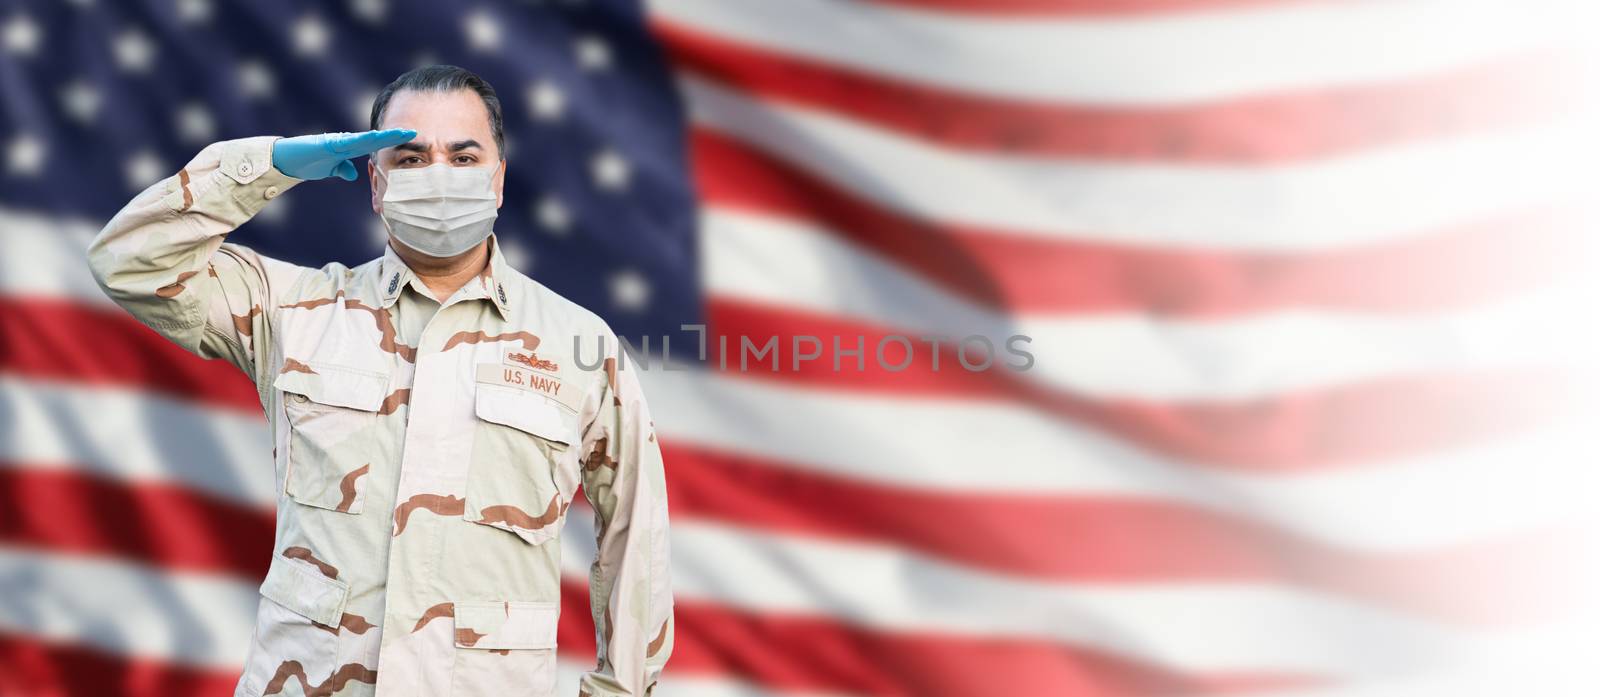 Male Navy Medical Personel Saluting Wearing Personnel Protective Equipment (PPE) With American Flag Background Banner.